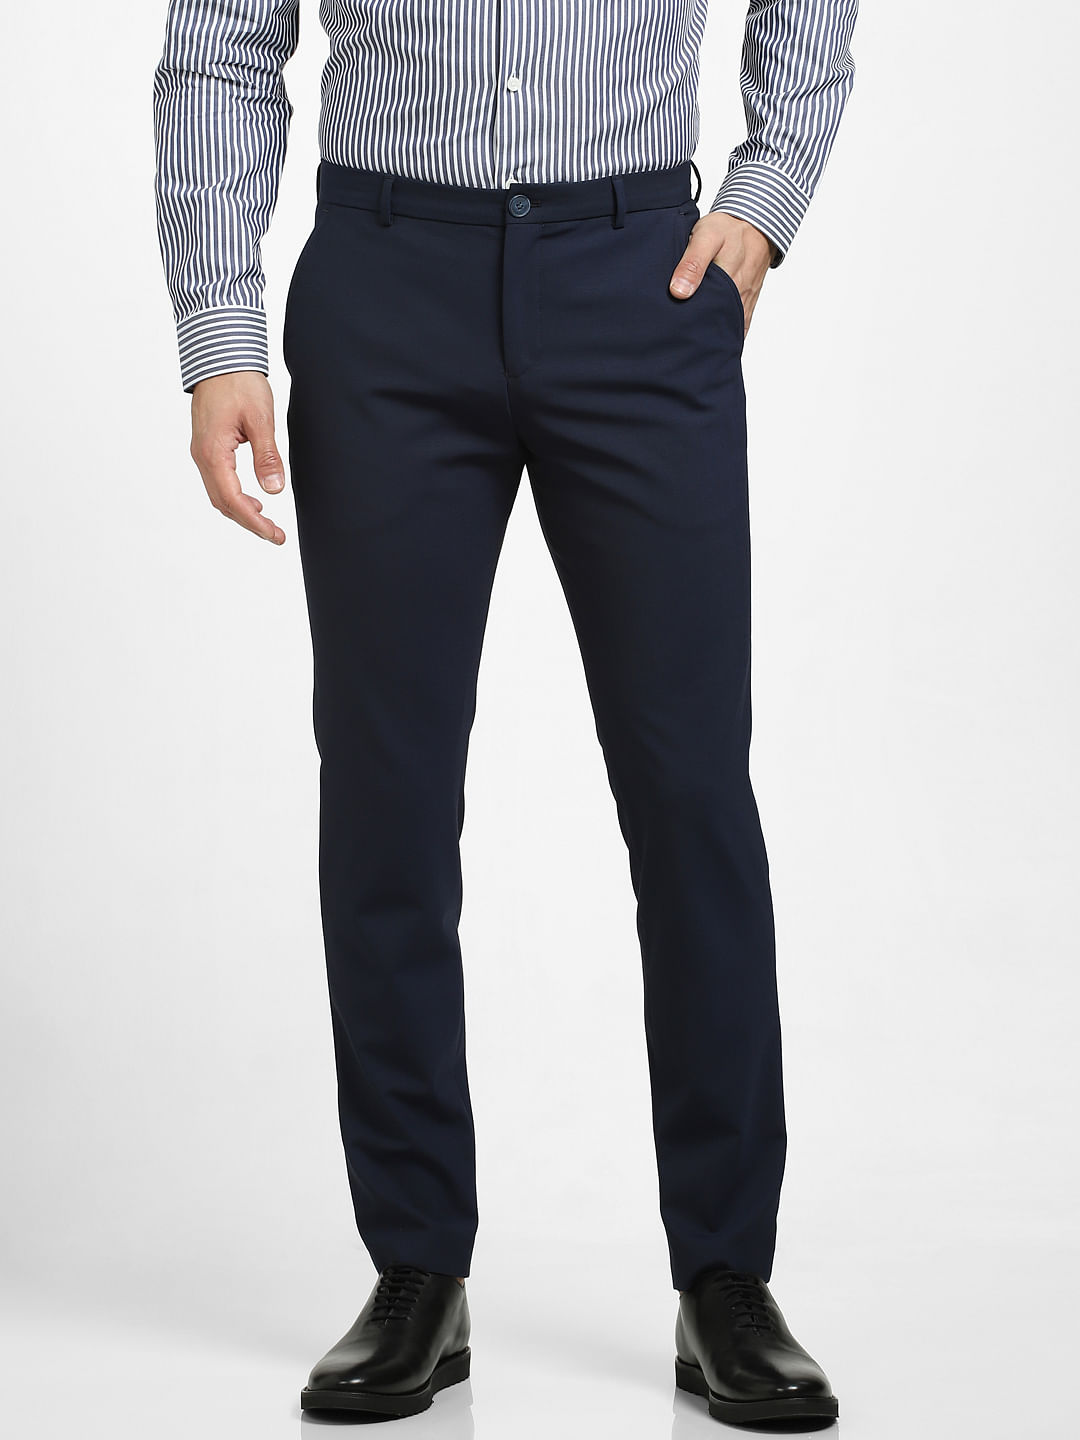 Samanthas Undeniable Knack For Suit Pants Makes Even The Most Boring  Formals Look Exciting  We Are Totally Sold For It